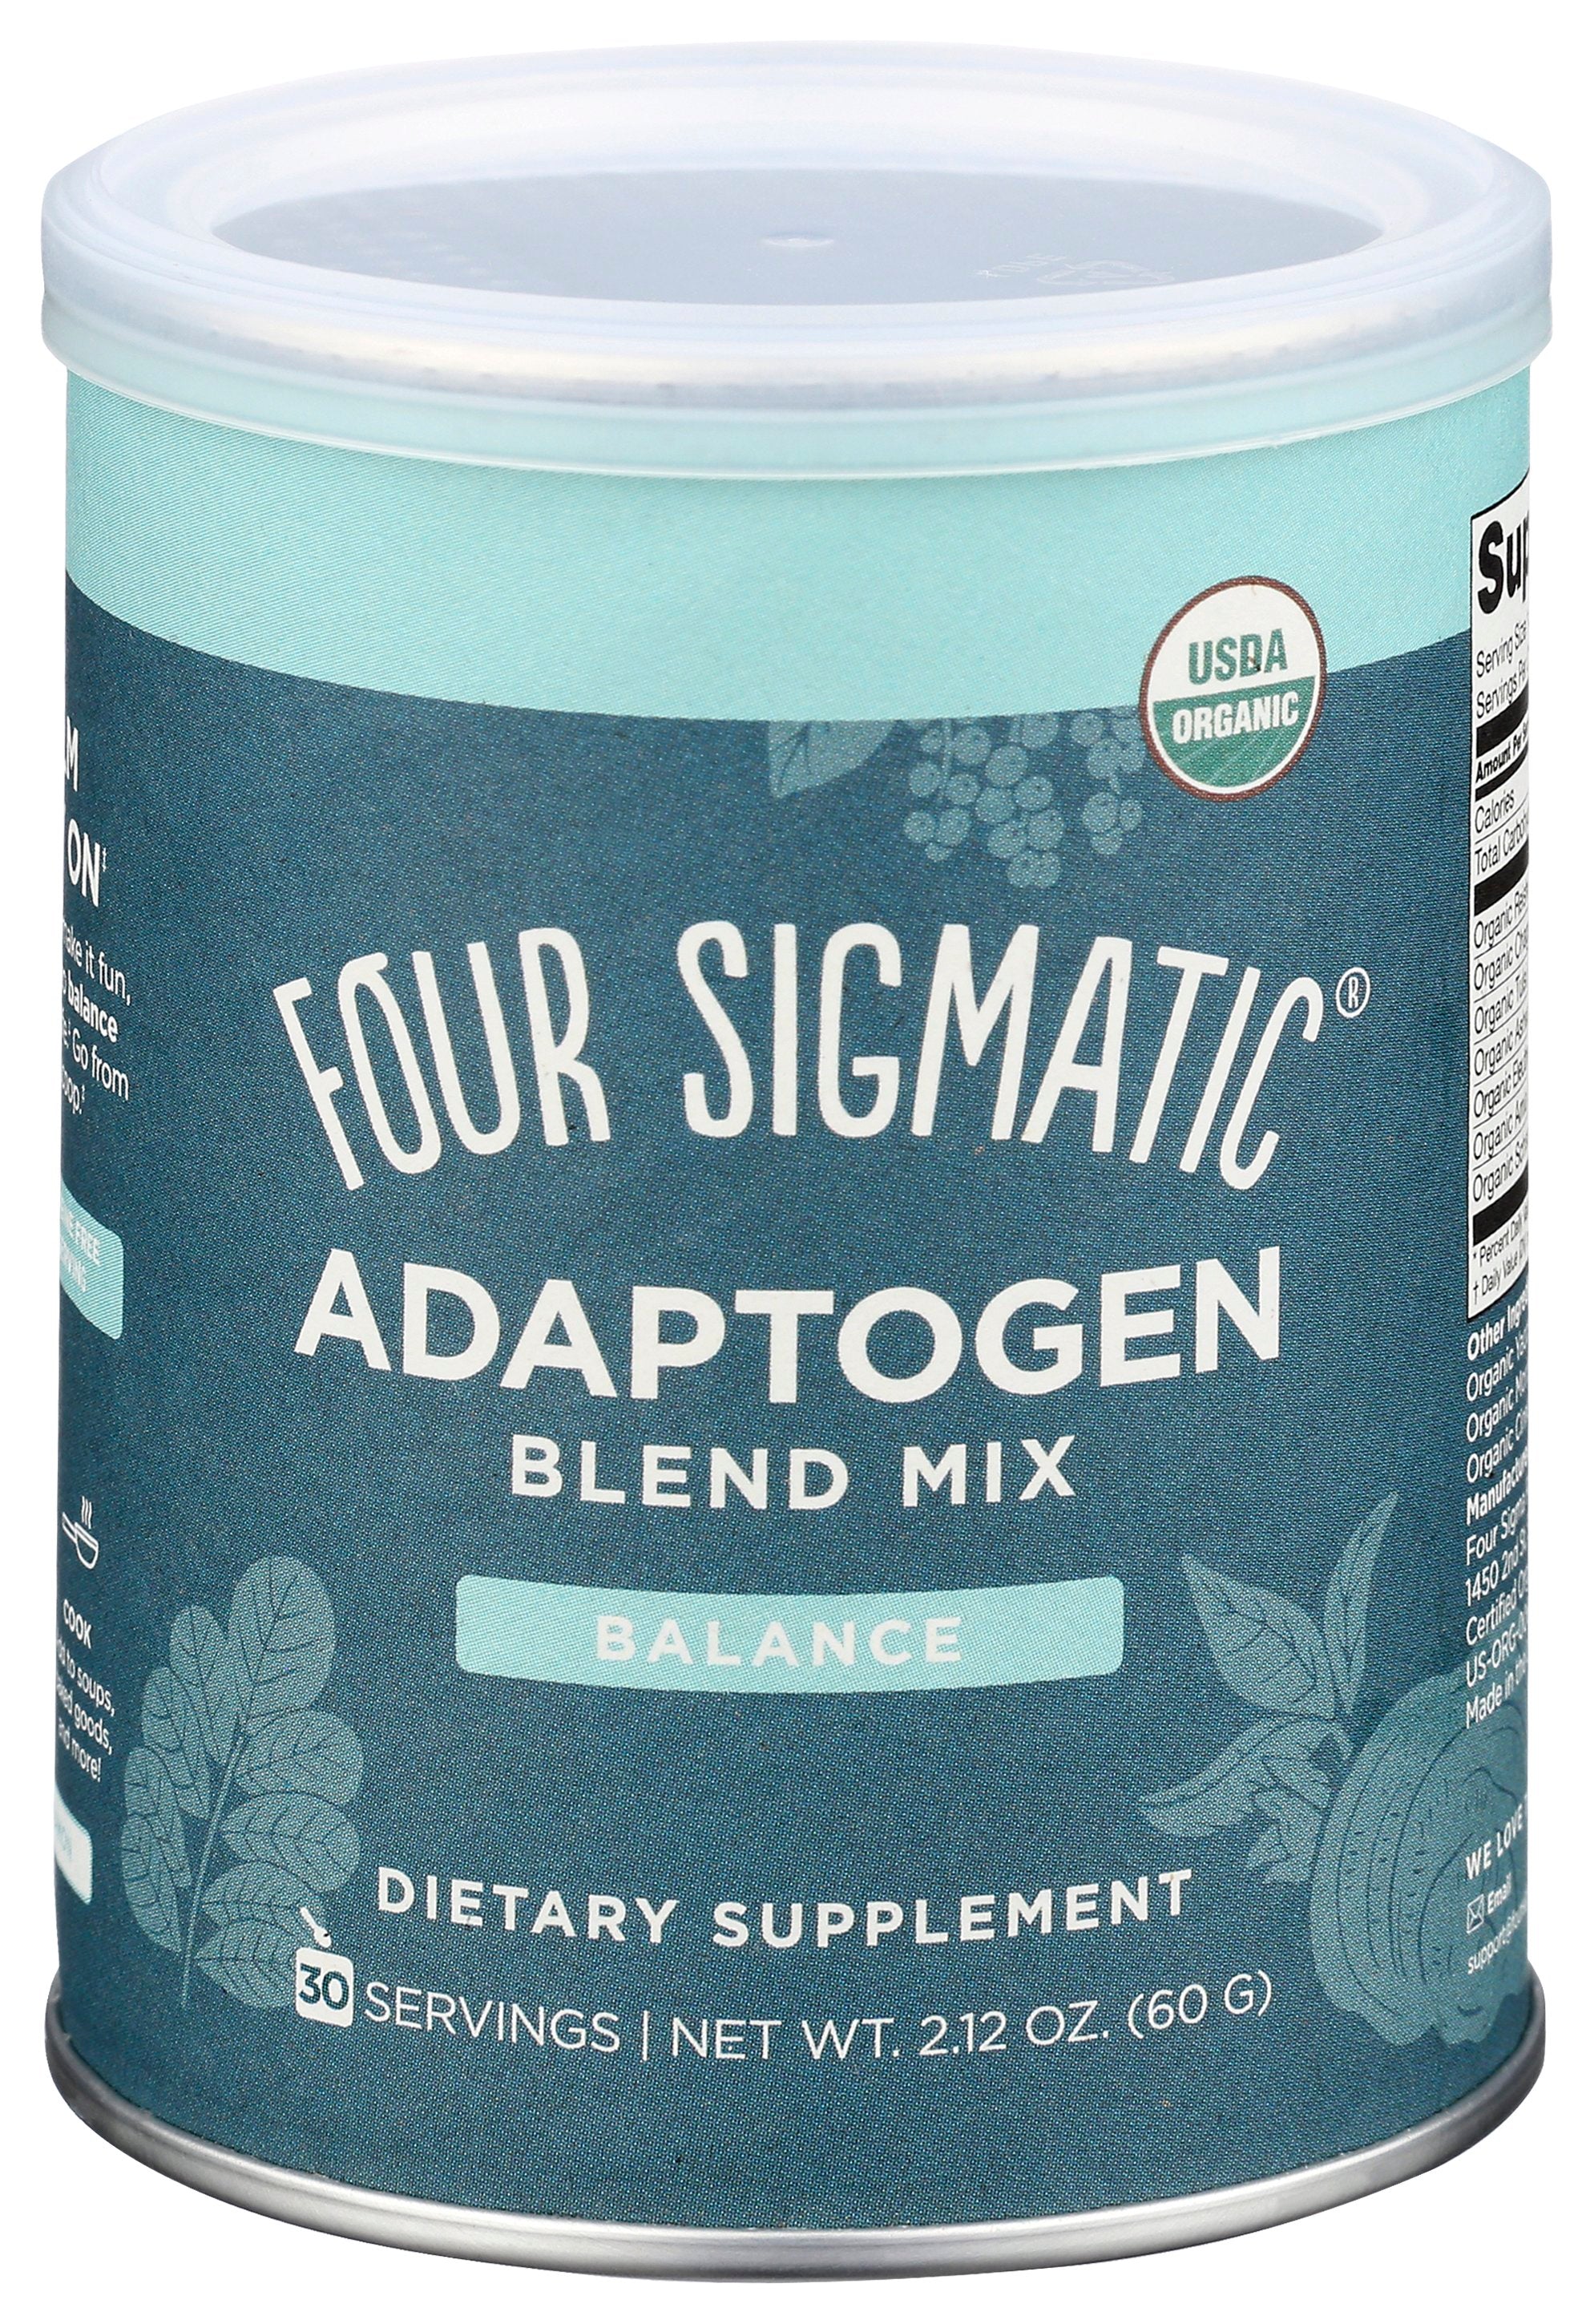 FOUR SIGMATIC BLEND MIX BALANCE - Case of 3